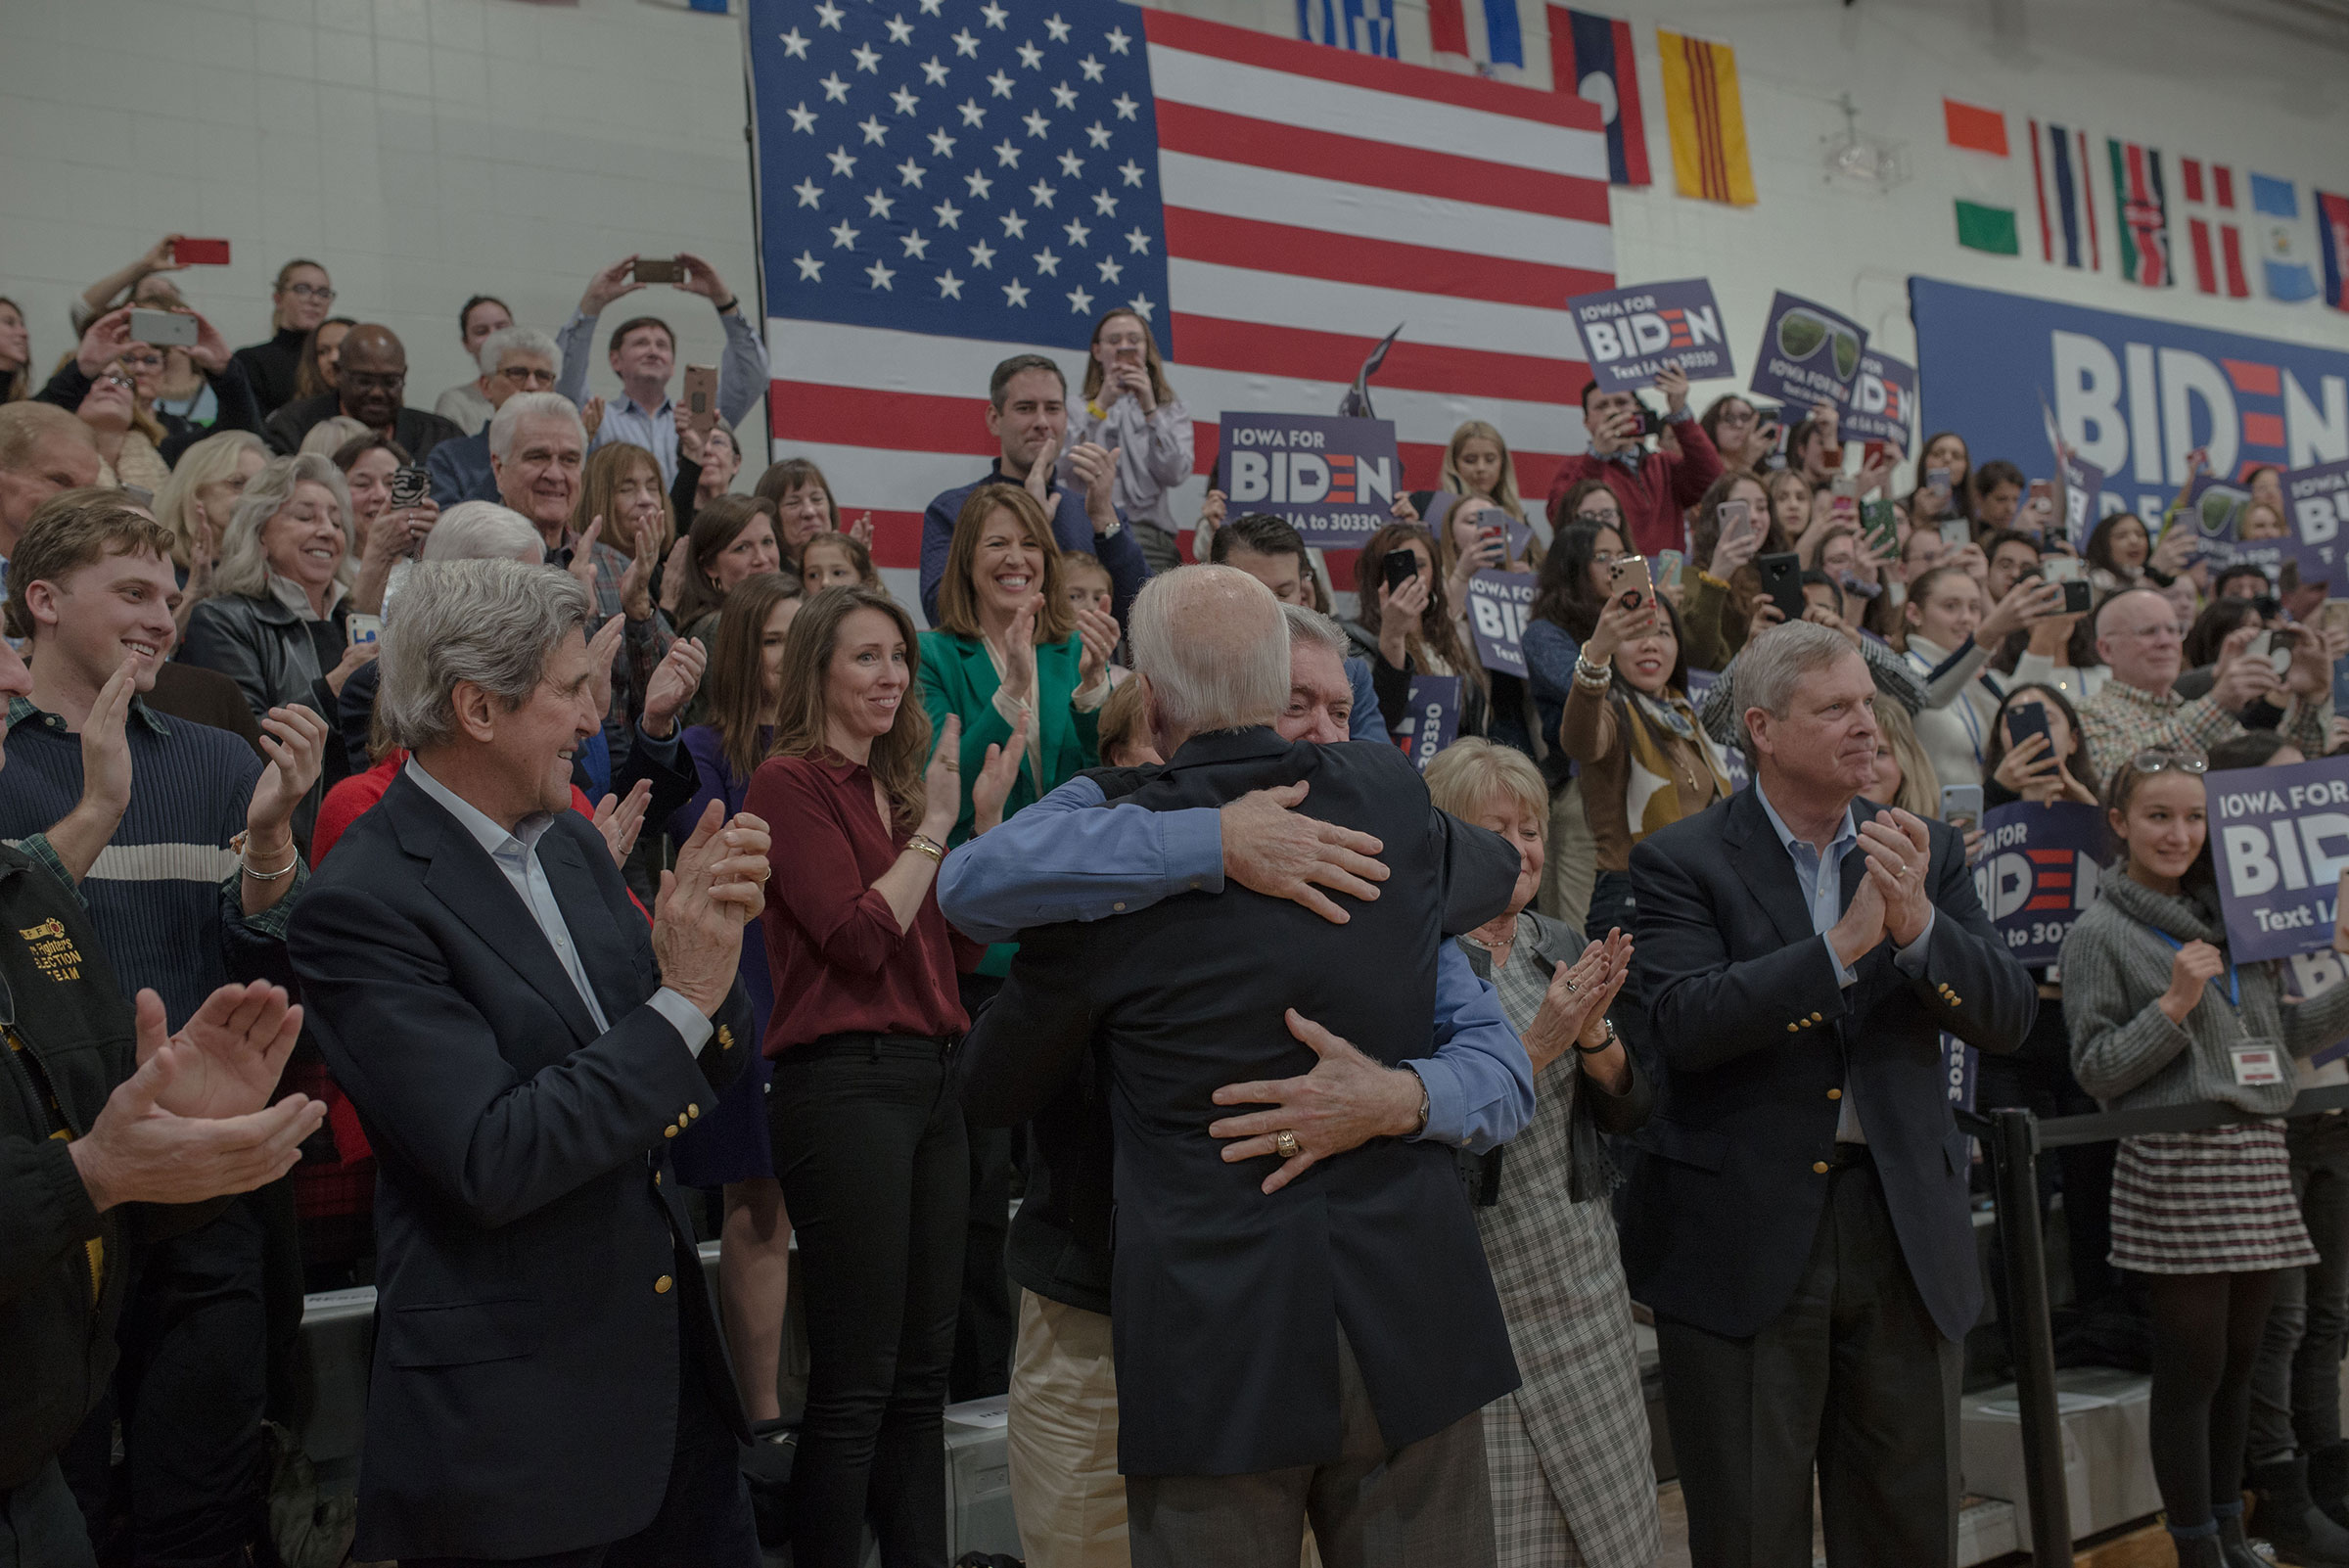 Joe Biden at a Town Hall in Des Moines, IA on Feb. 2, 2020. (September Dawn Bottoms for TIME)